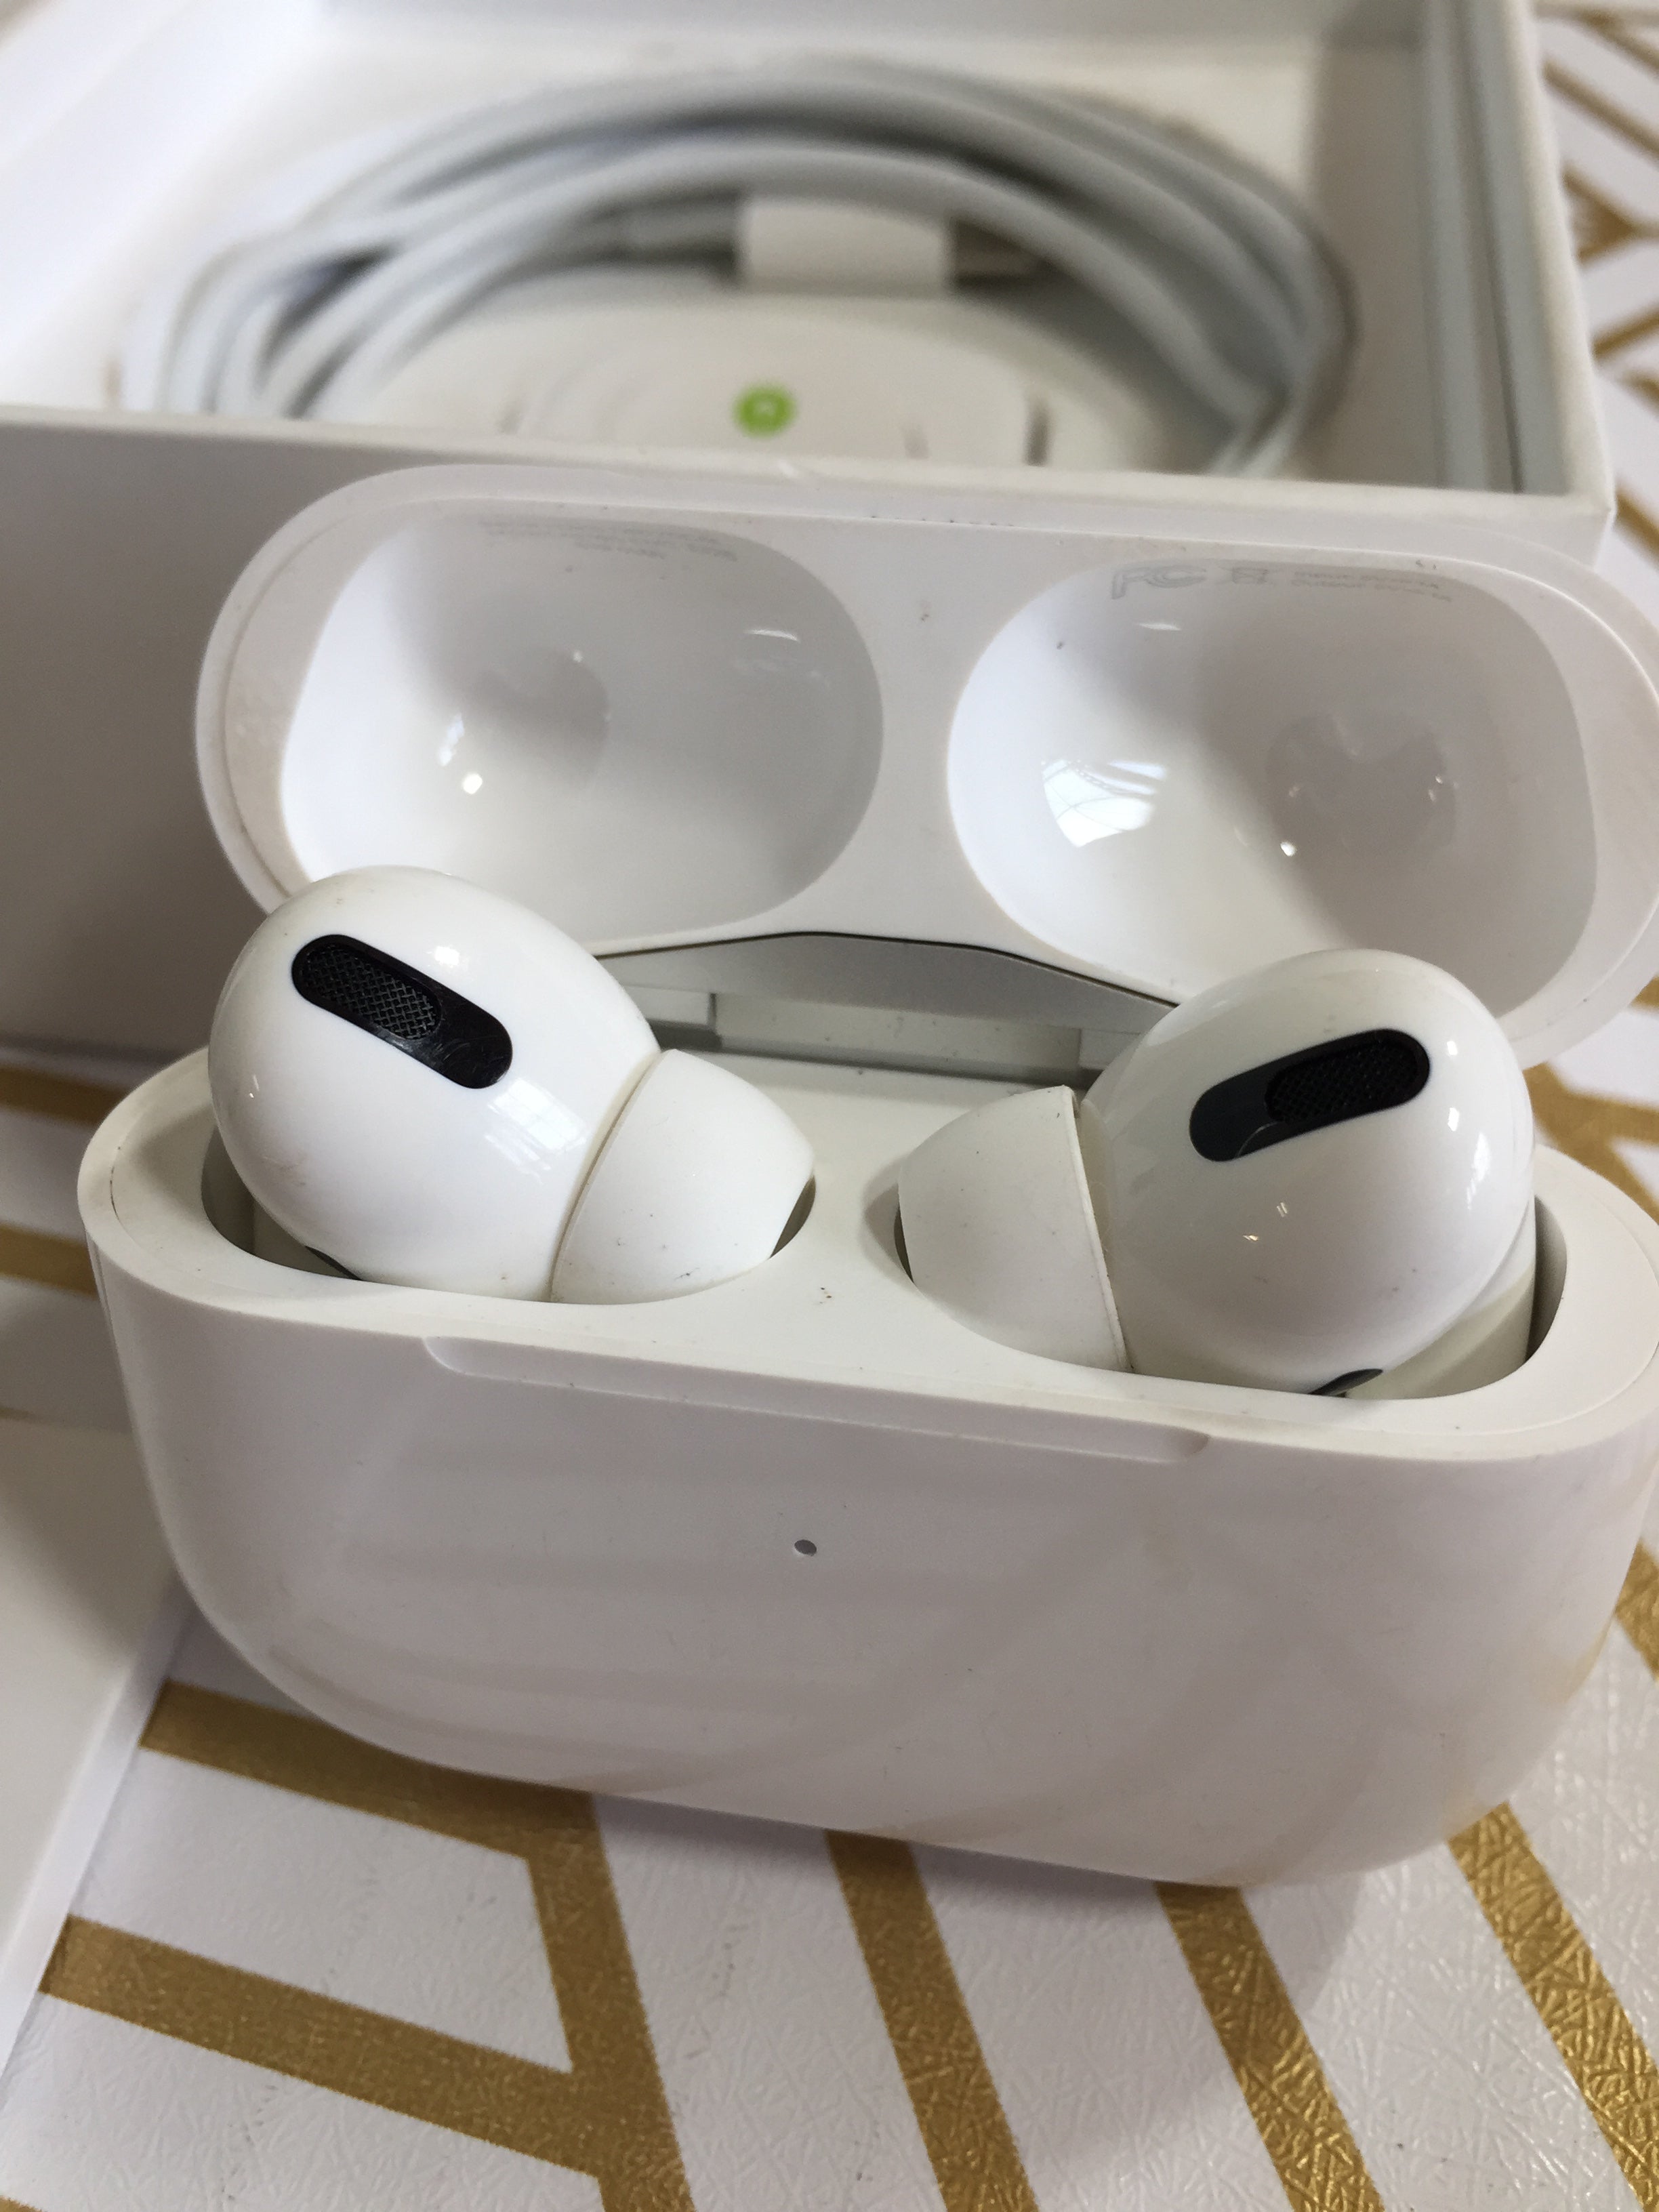 Apple AirPods Pro *GREAT CONDITION* (7677075652846)